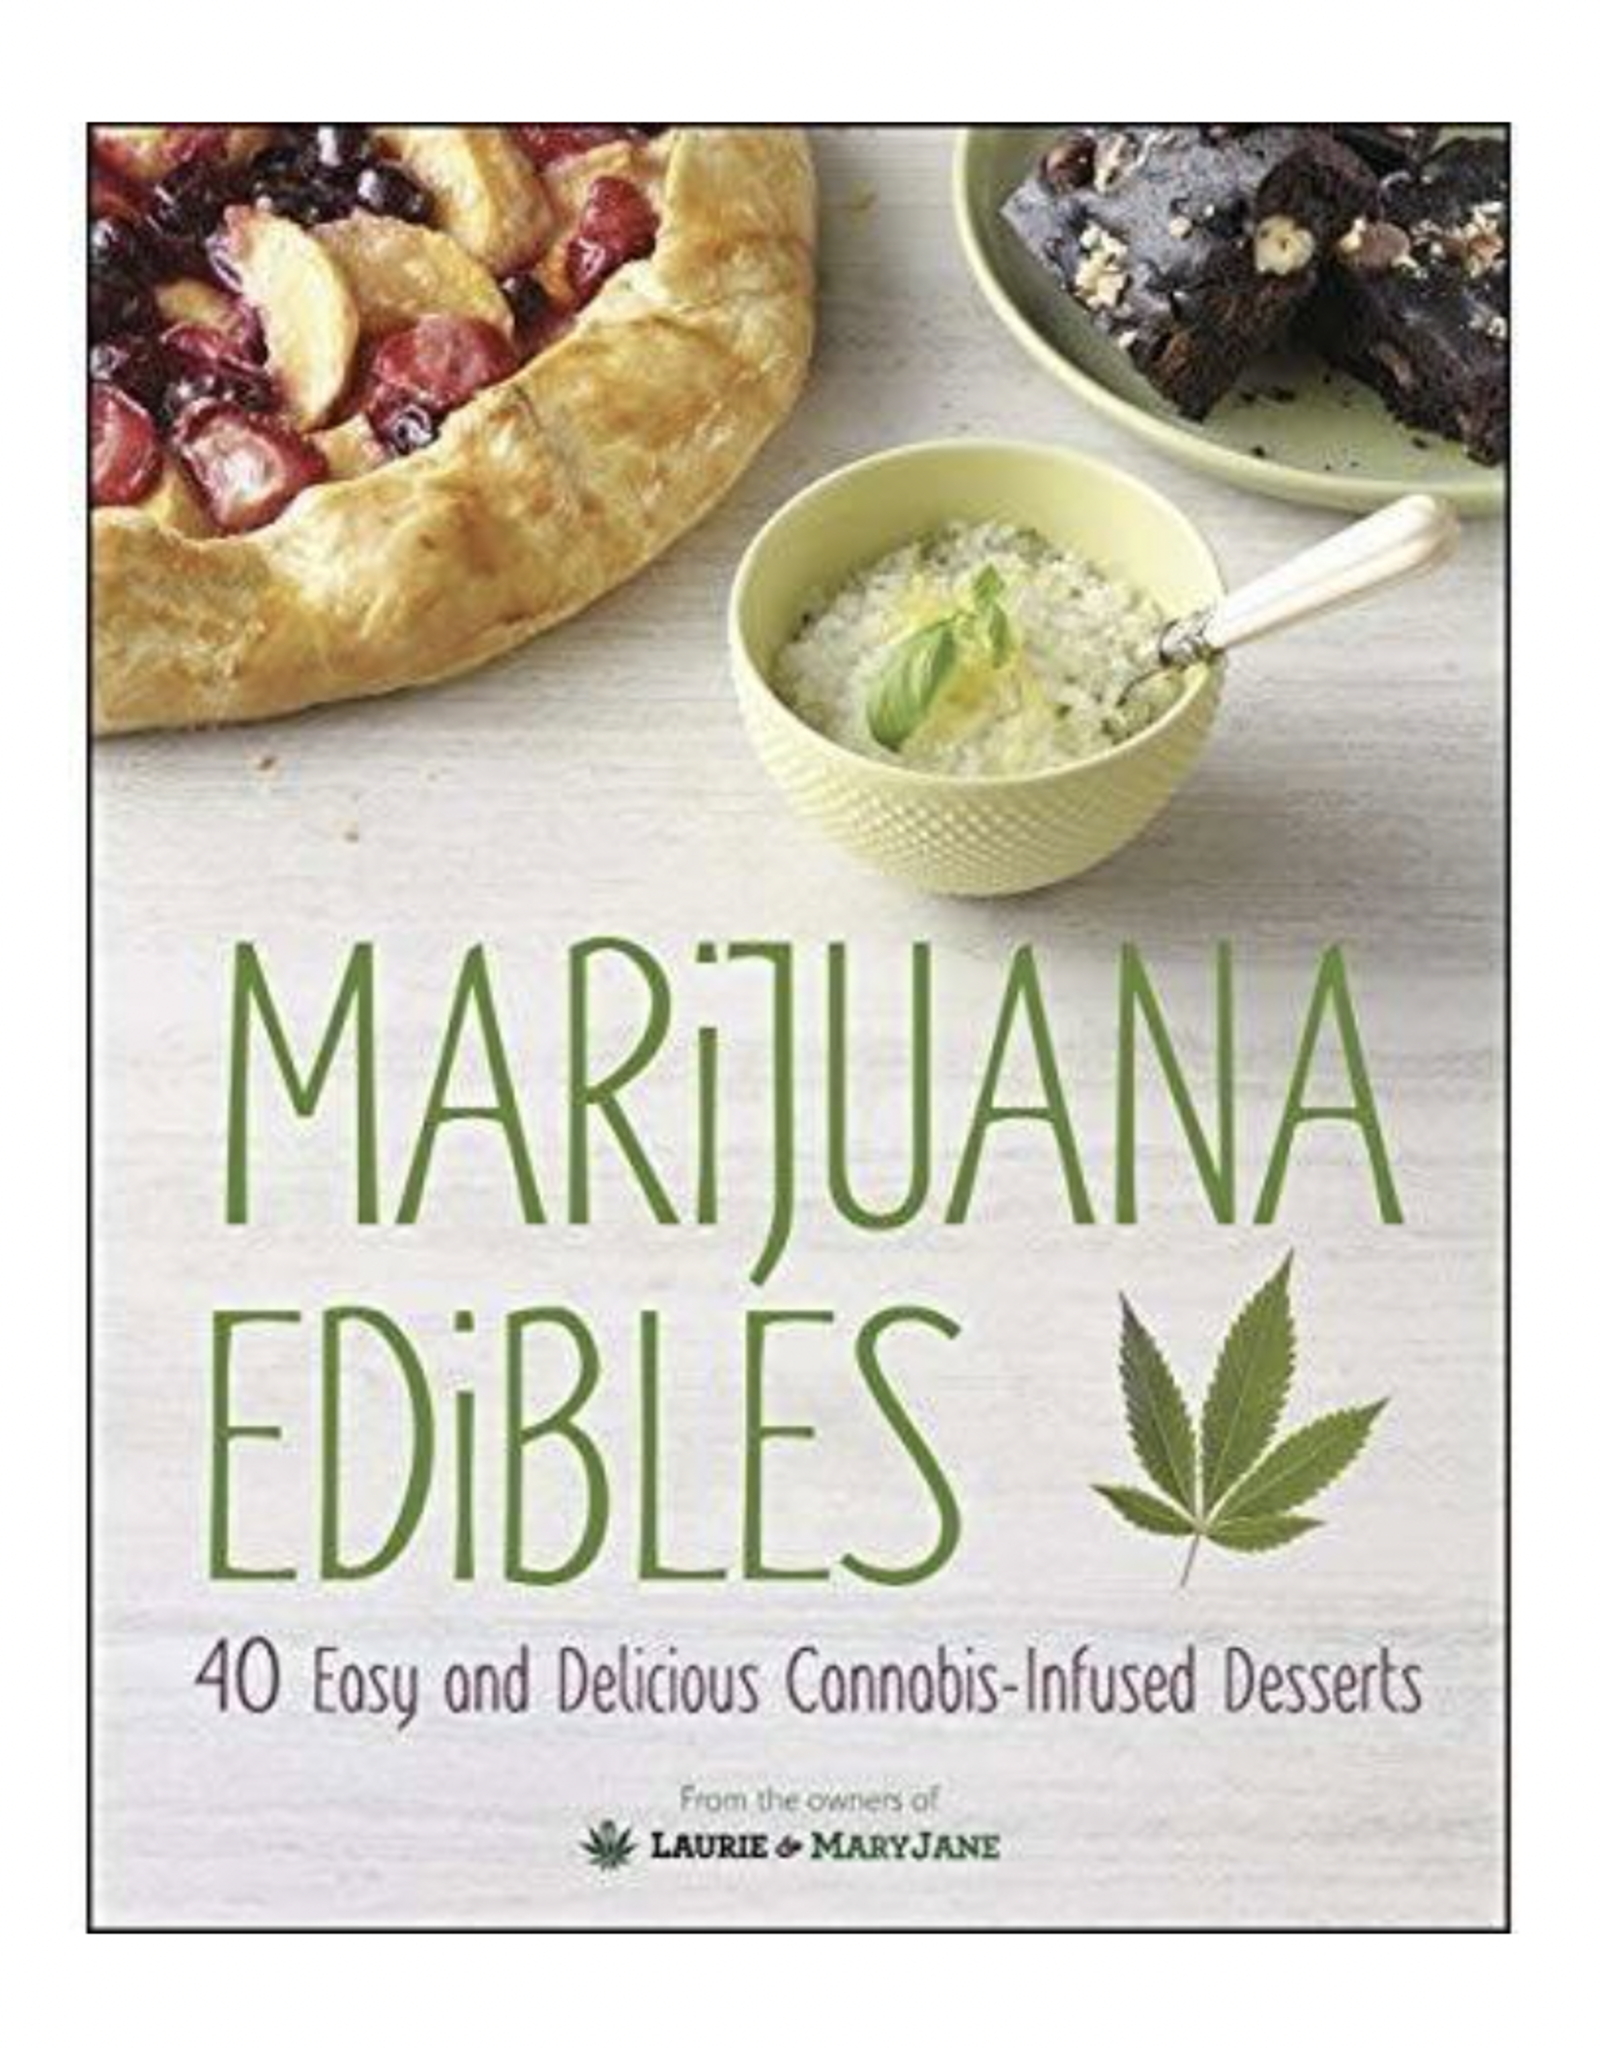 Marijuana Edibles: 40 Easy & Delicious Cannabis-Infused Desserts by Laurie Wolf and Mary Thigpen